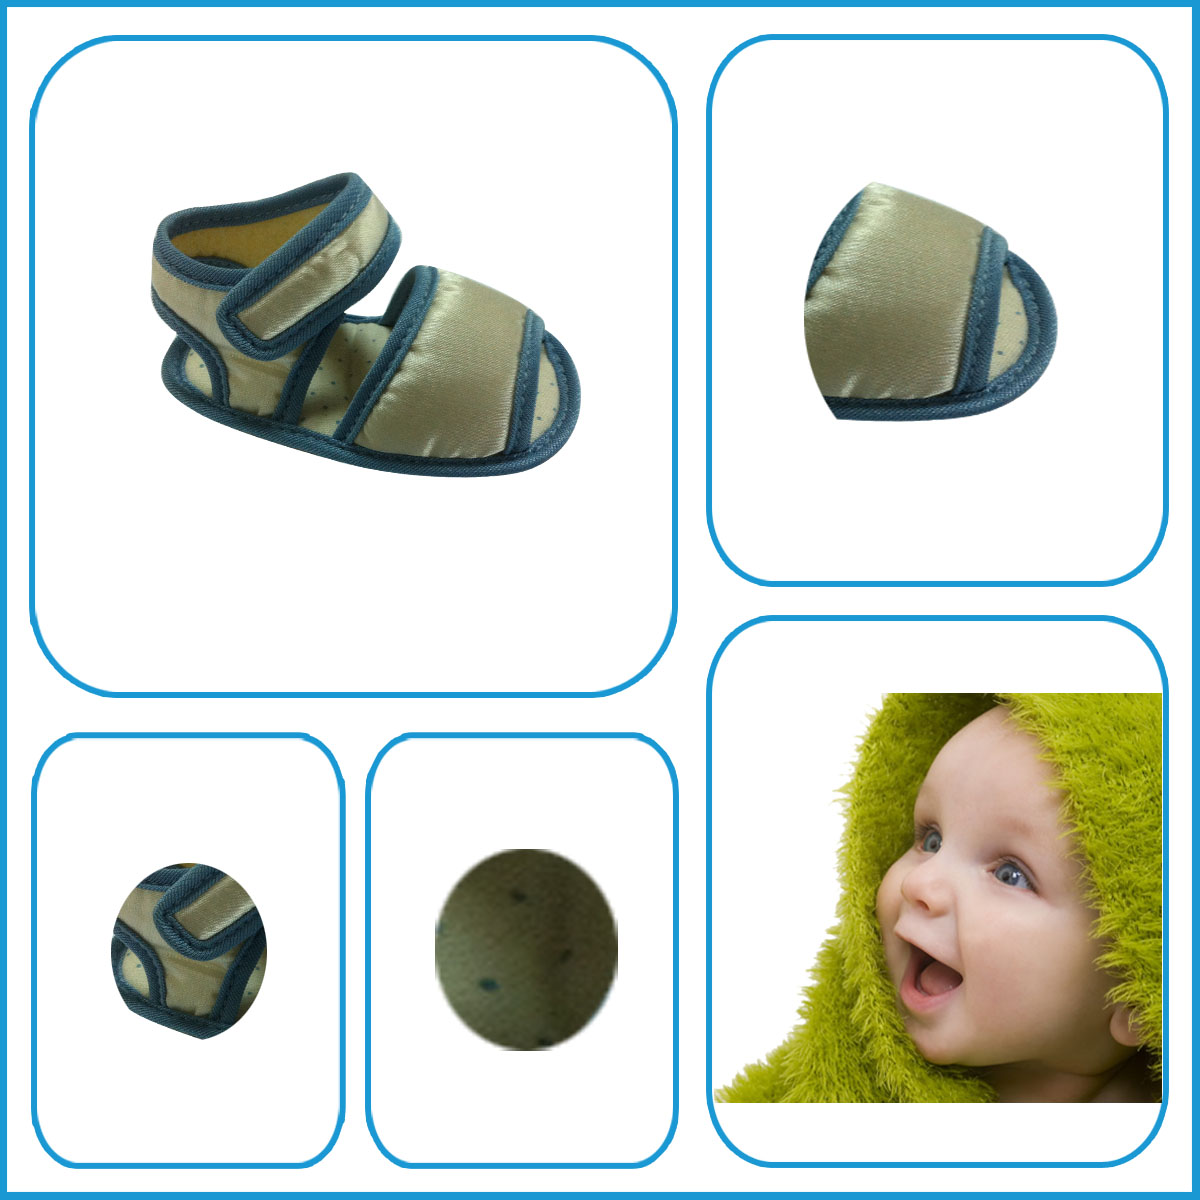 High Quality New Design Wholesale Soft Infant Baby Sandal Shoes